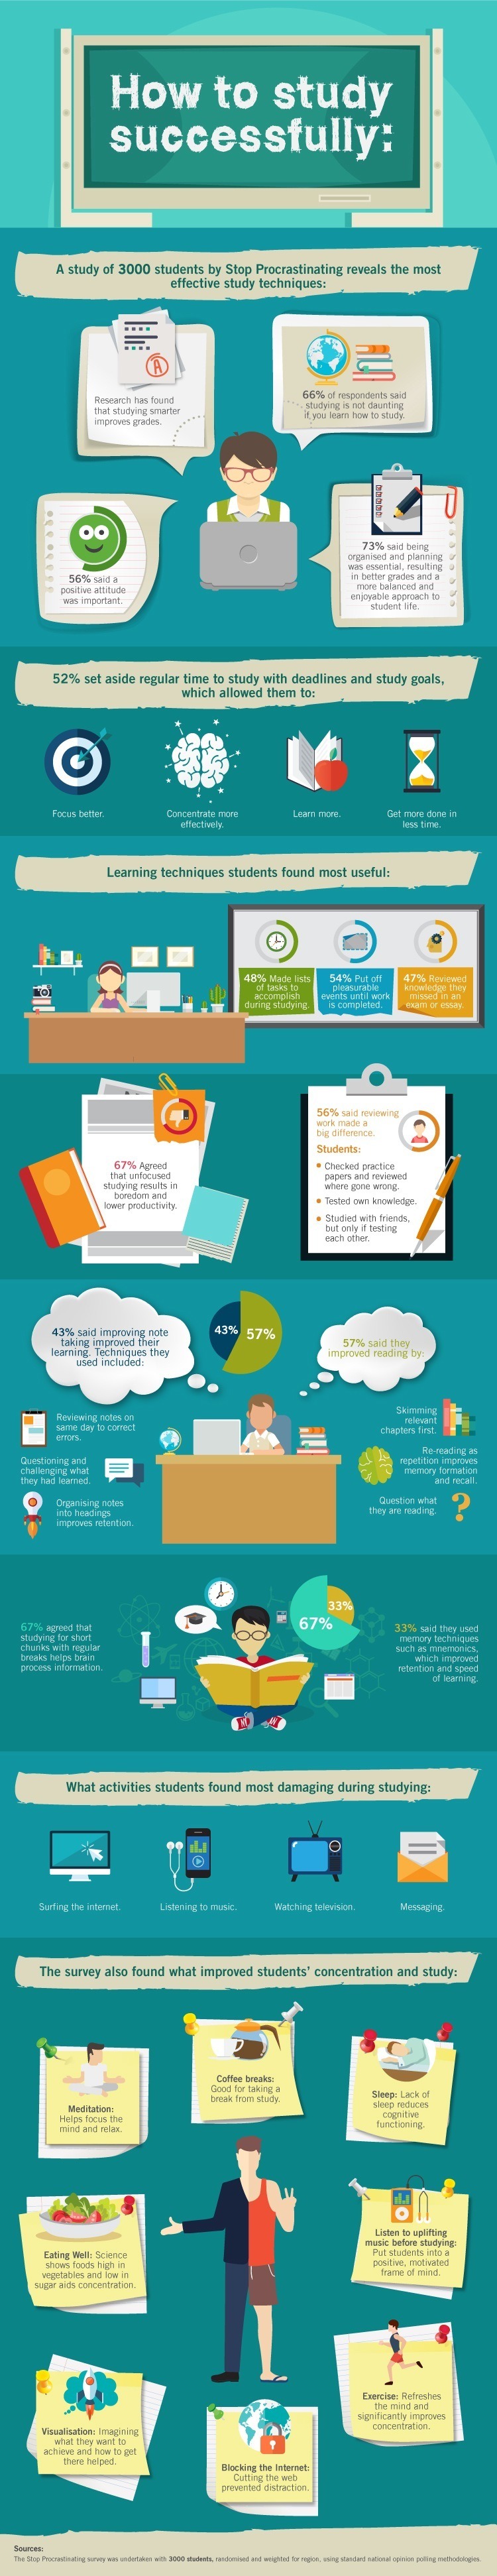 How to Study Successfully Infographic